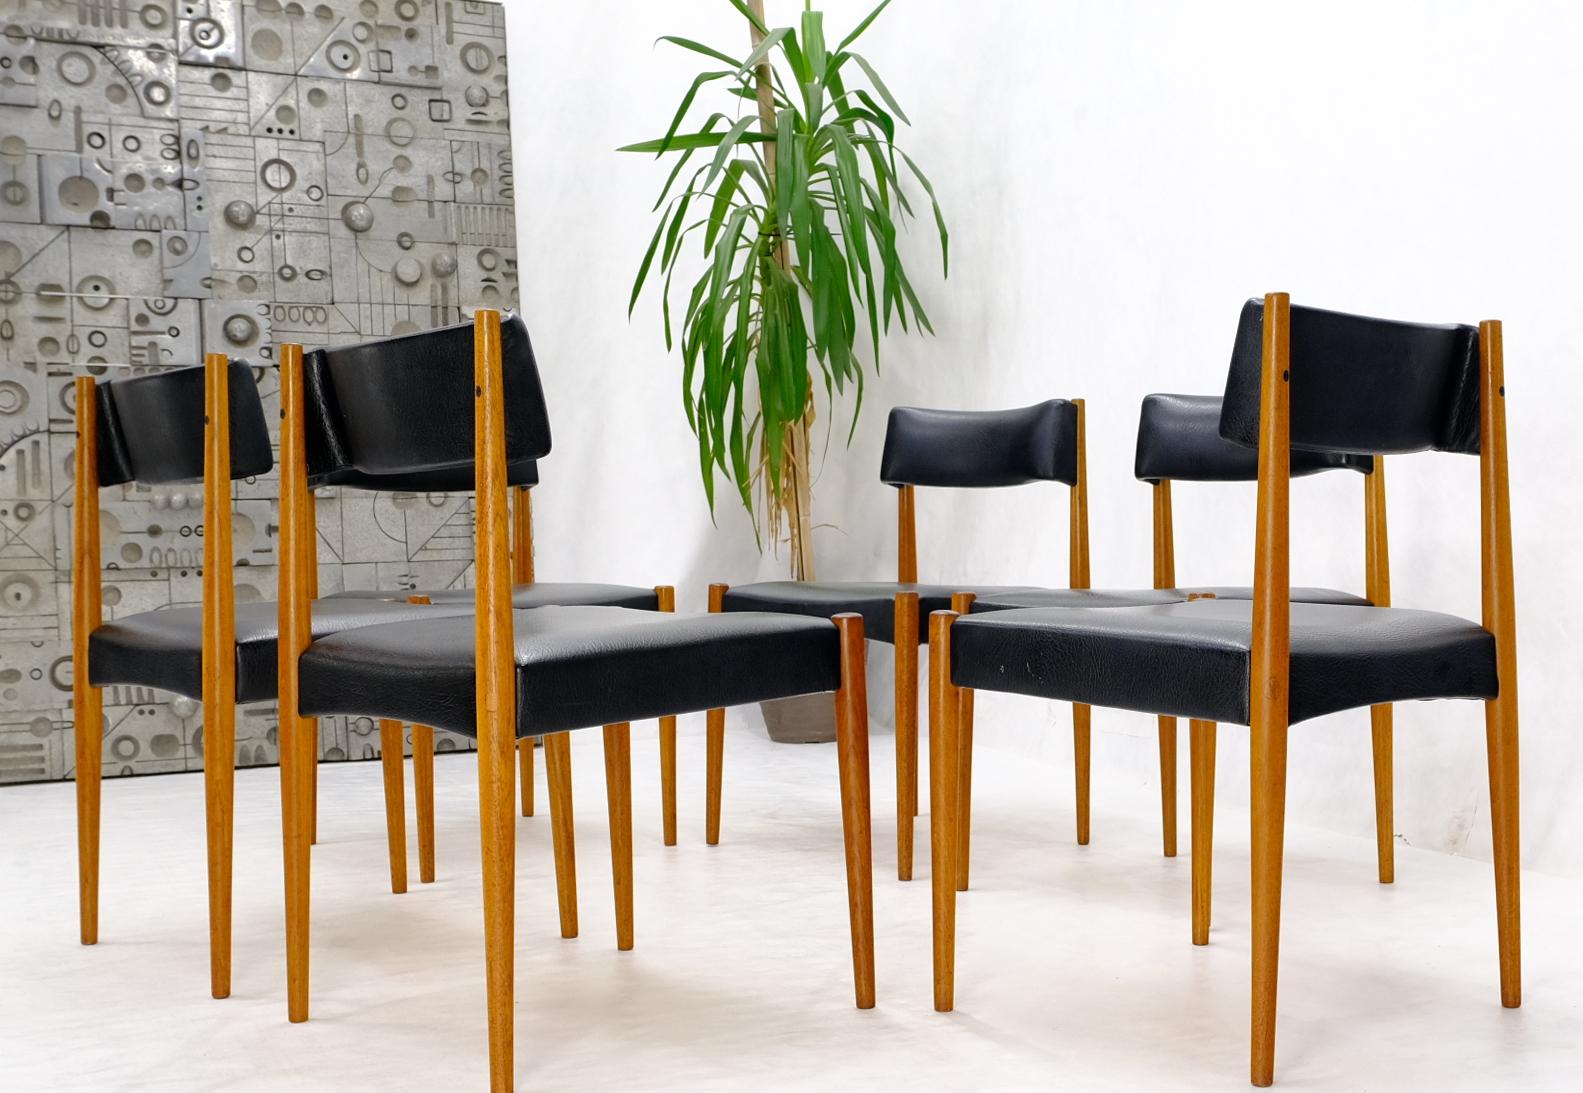 Set of 6 Danish Teak Mid Century Modern Dining Chairs in Black Upholstery For Sale 7